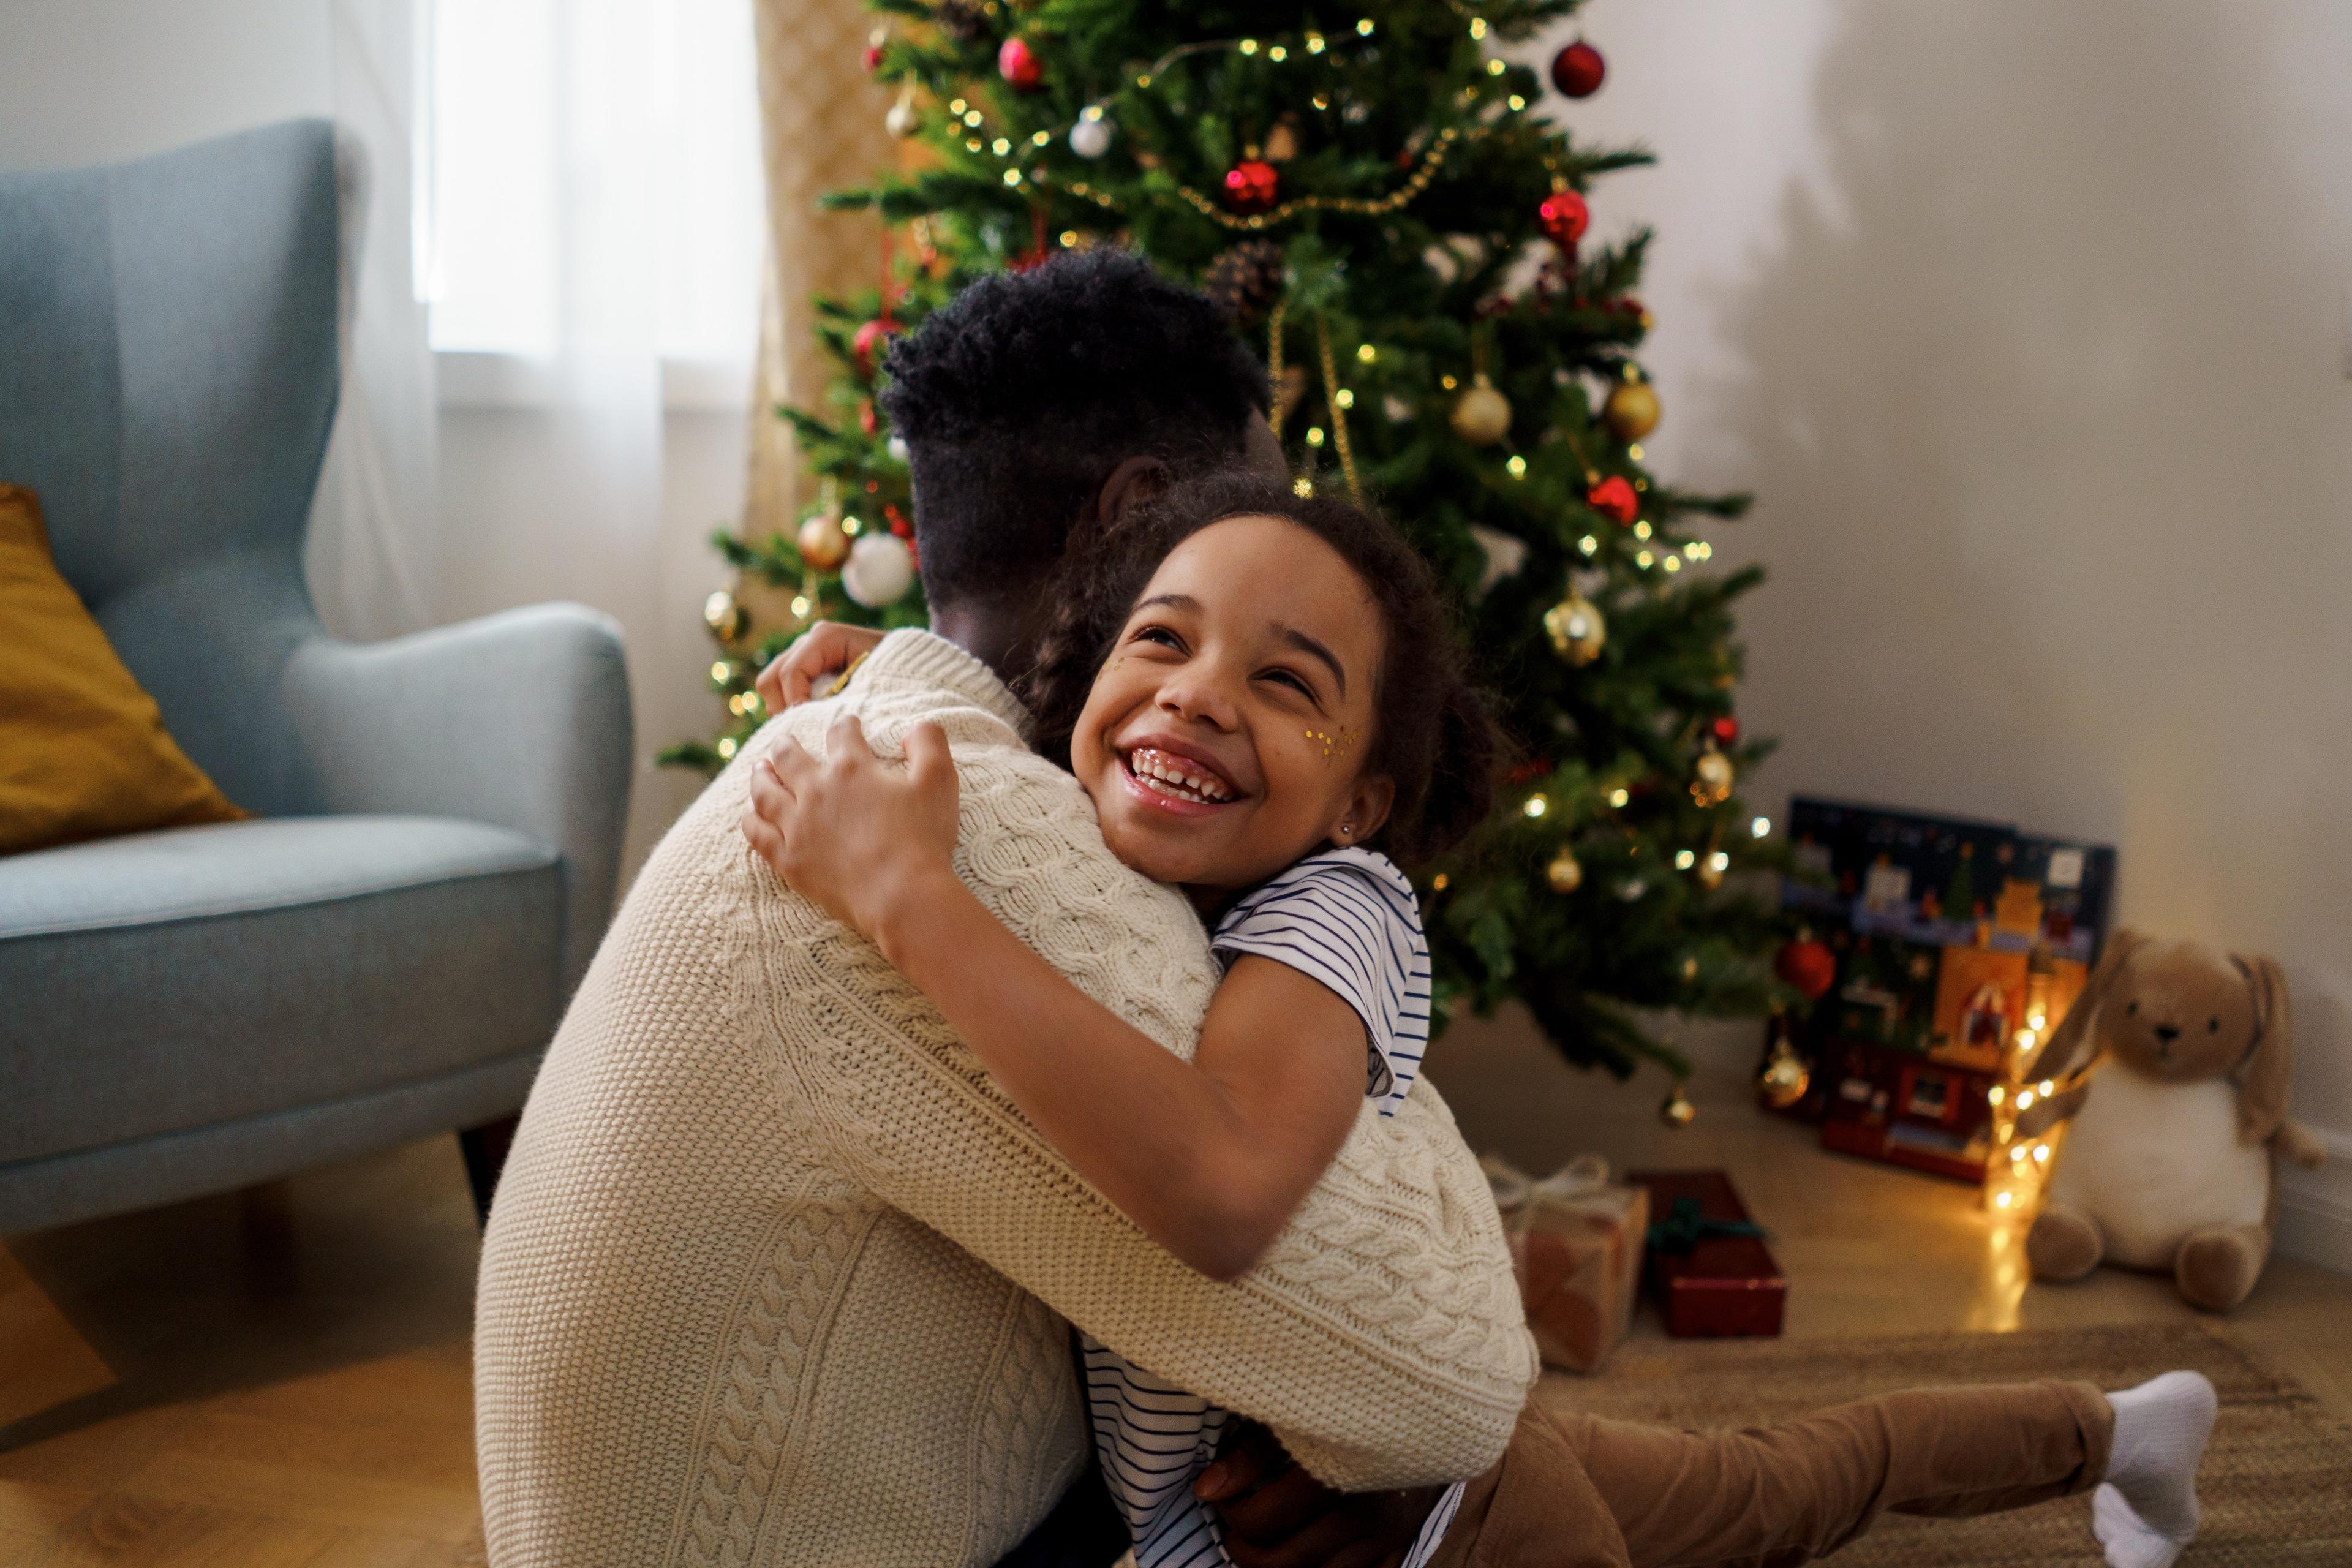 A young girl hugs her father in front of a Christmas tree